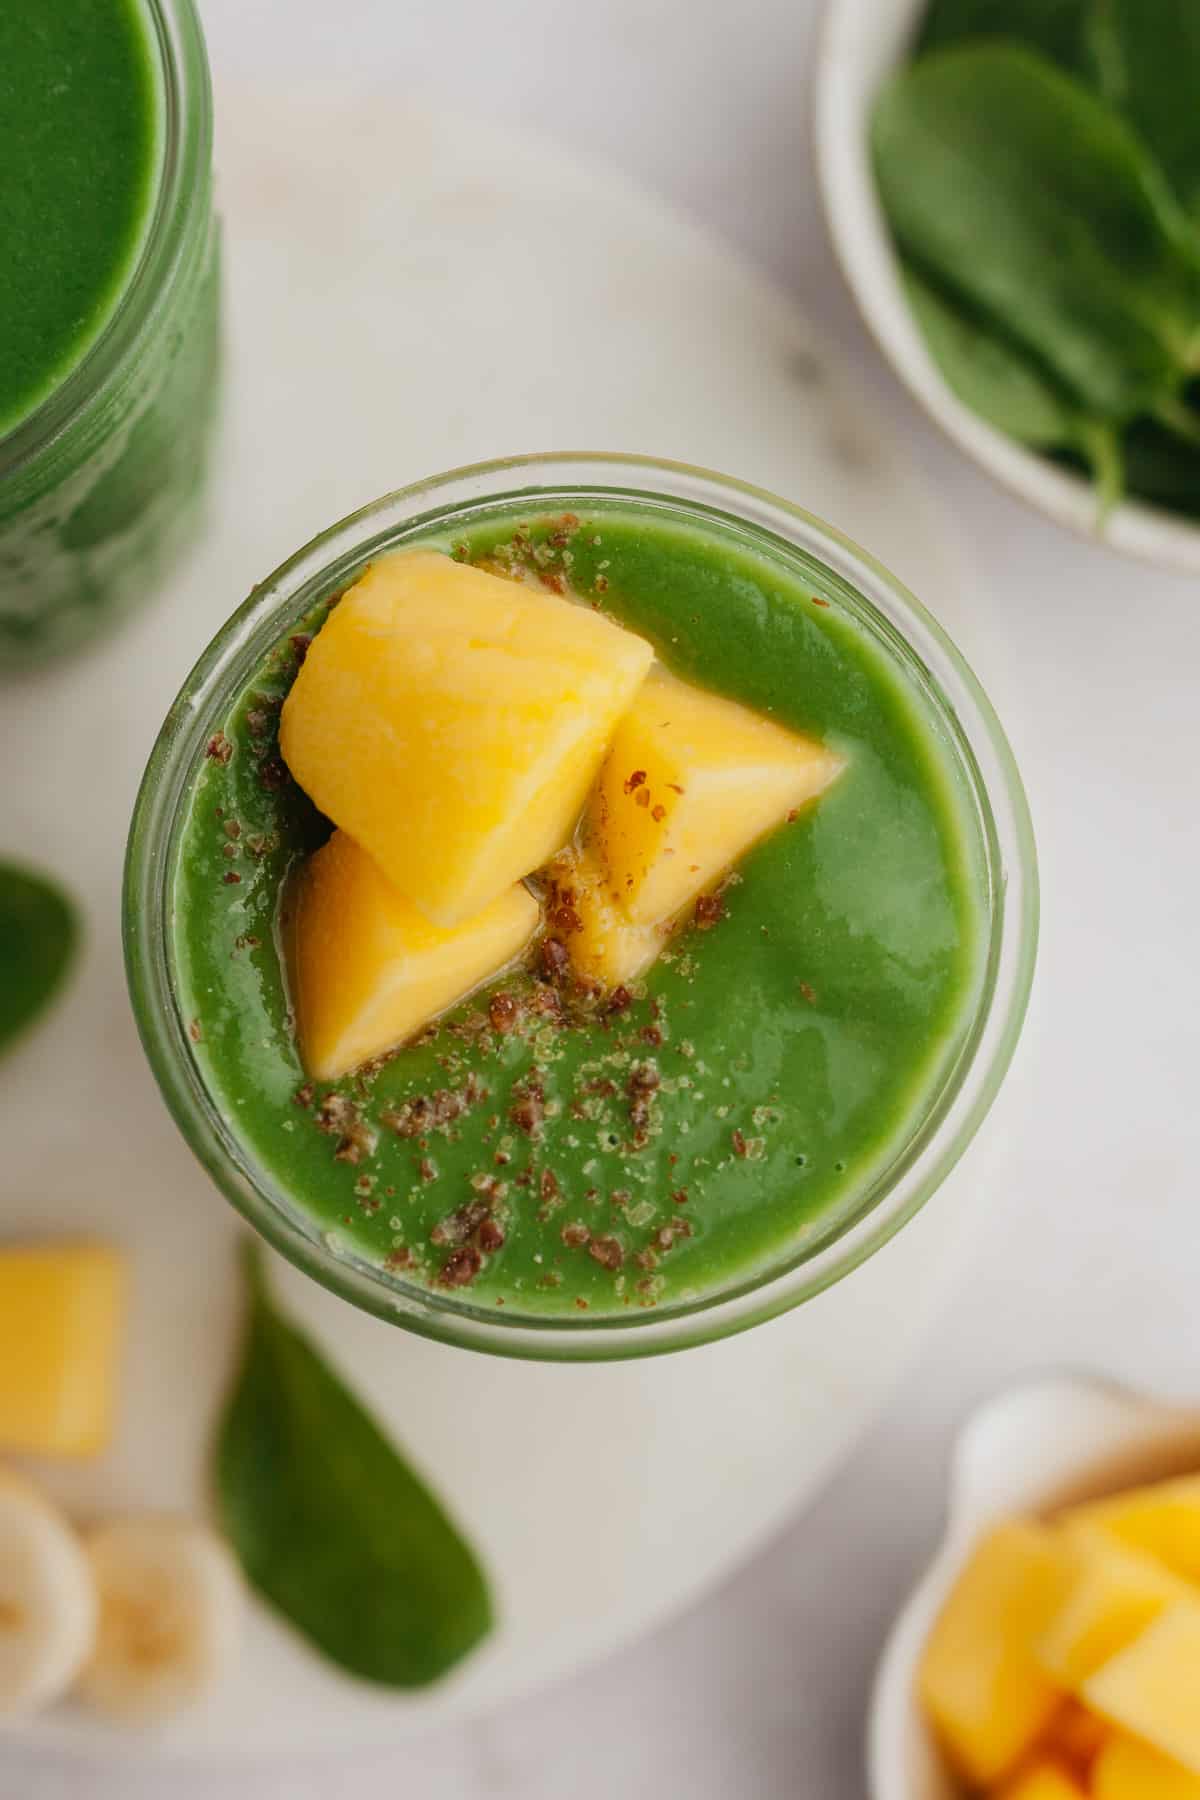 An overhead shot of a green smoothie with mango pieces.